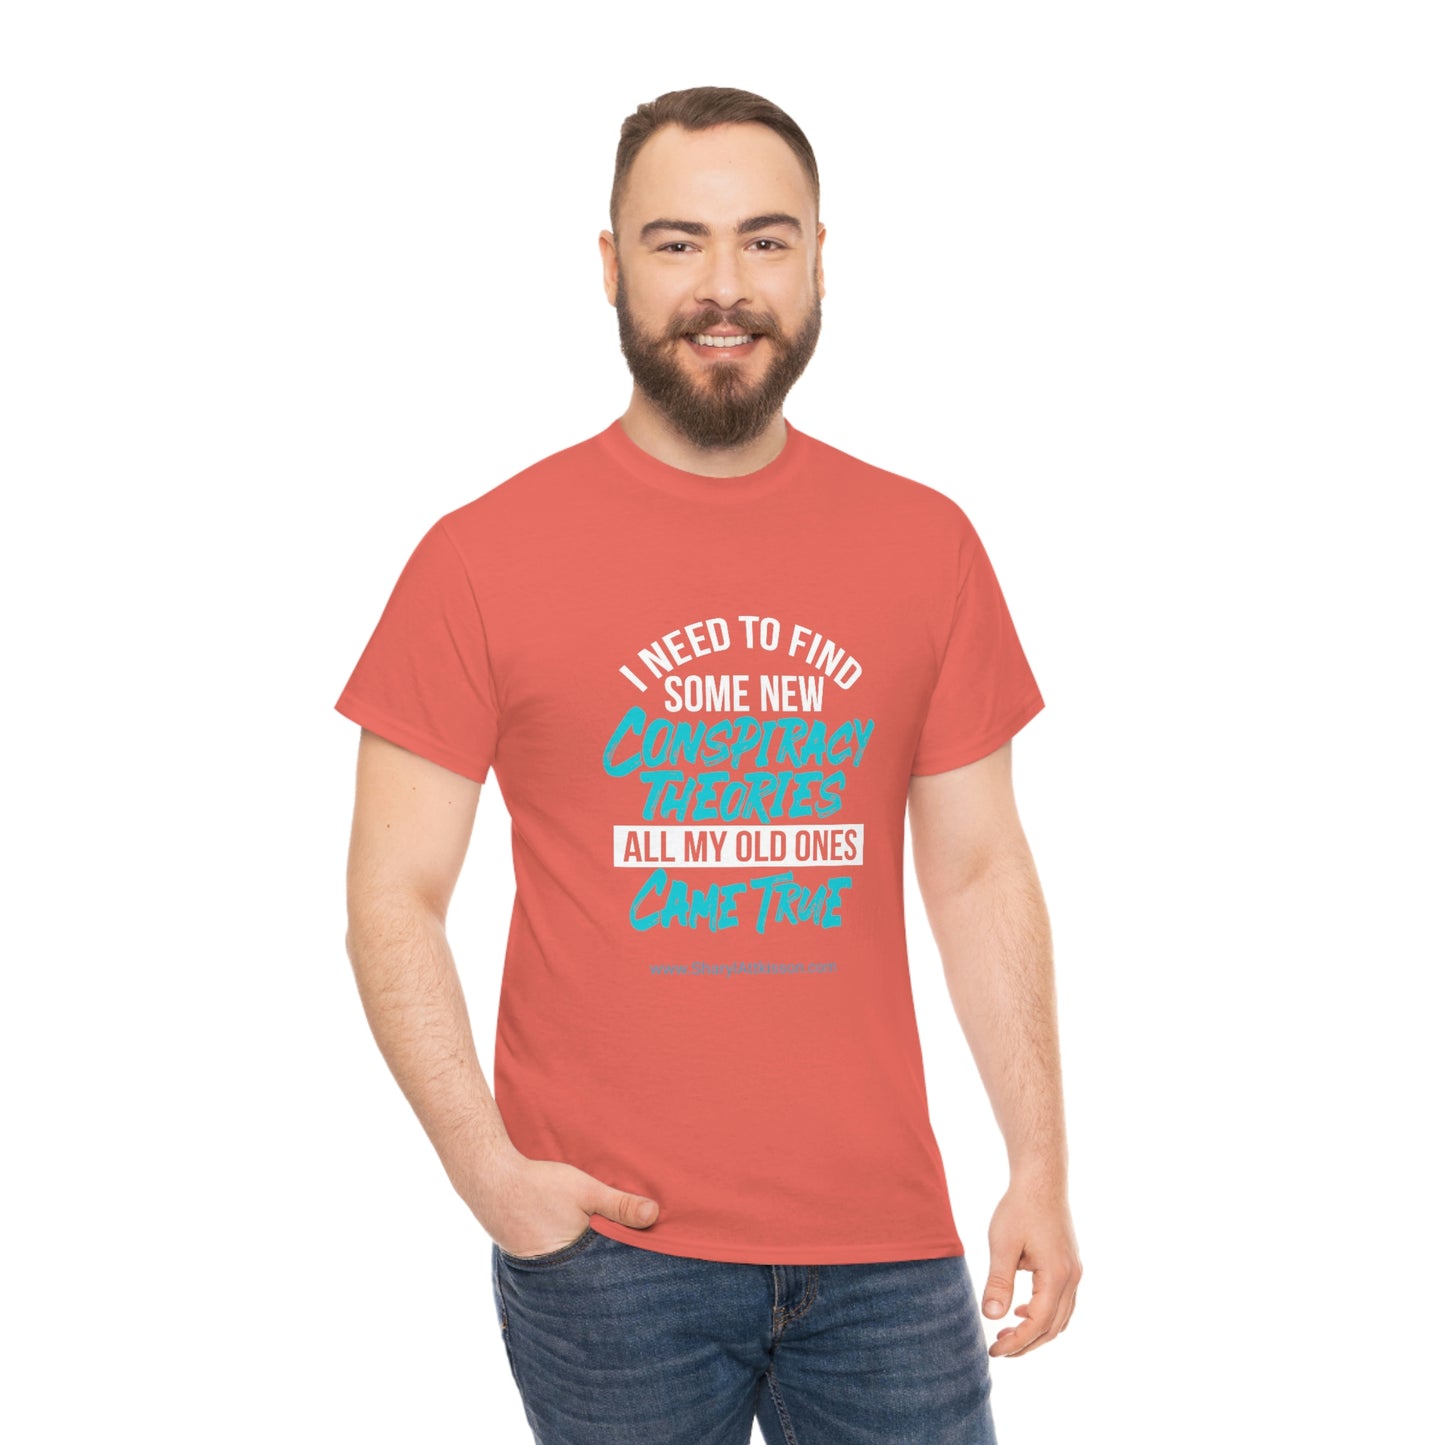 'Conspiracy Theories...Came True' T-Shirt (8 colors)